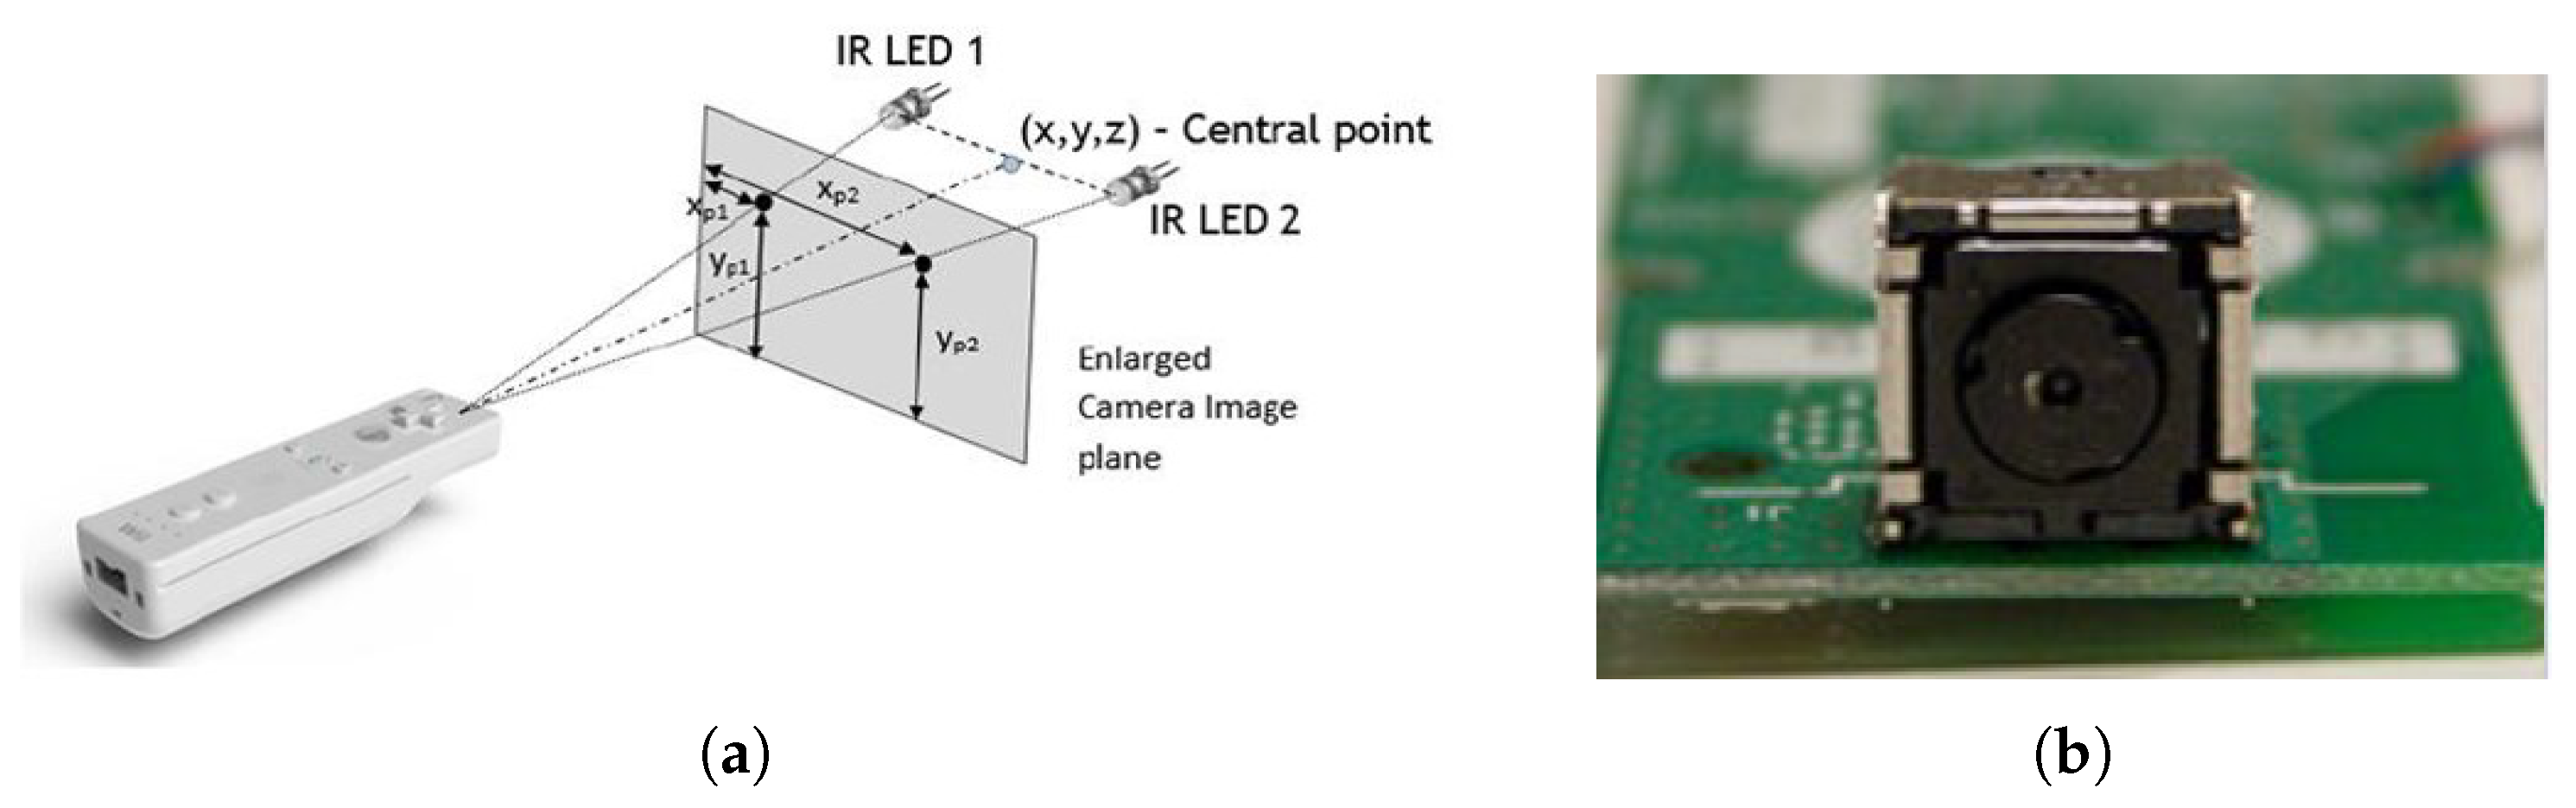 Sensors | Free Full-Text | Outdoor Target Positioning Using Wii Remote IR  Camera and Signal Modulation